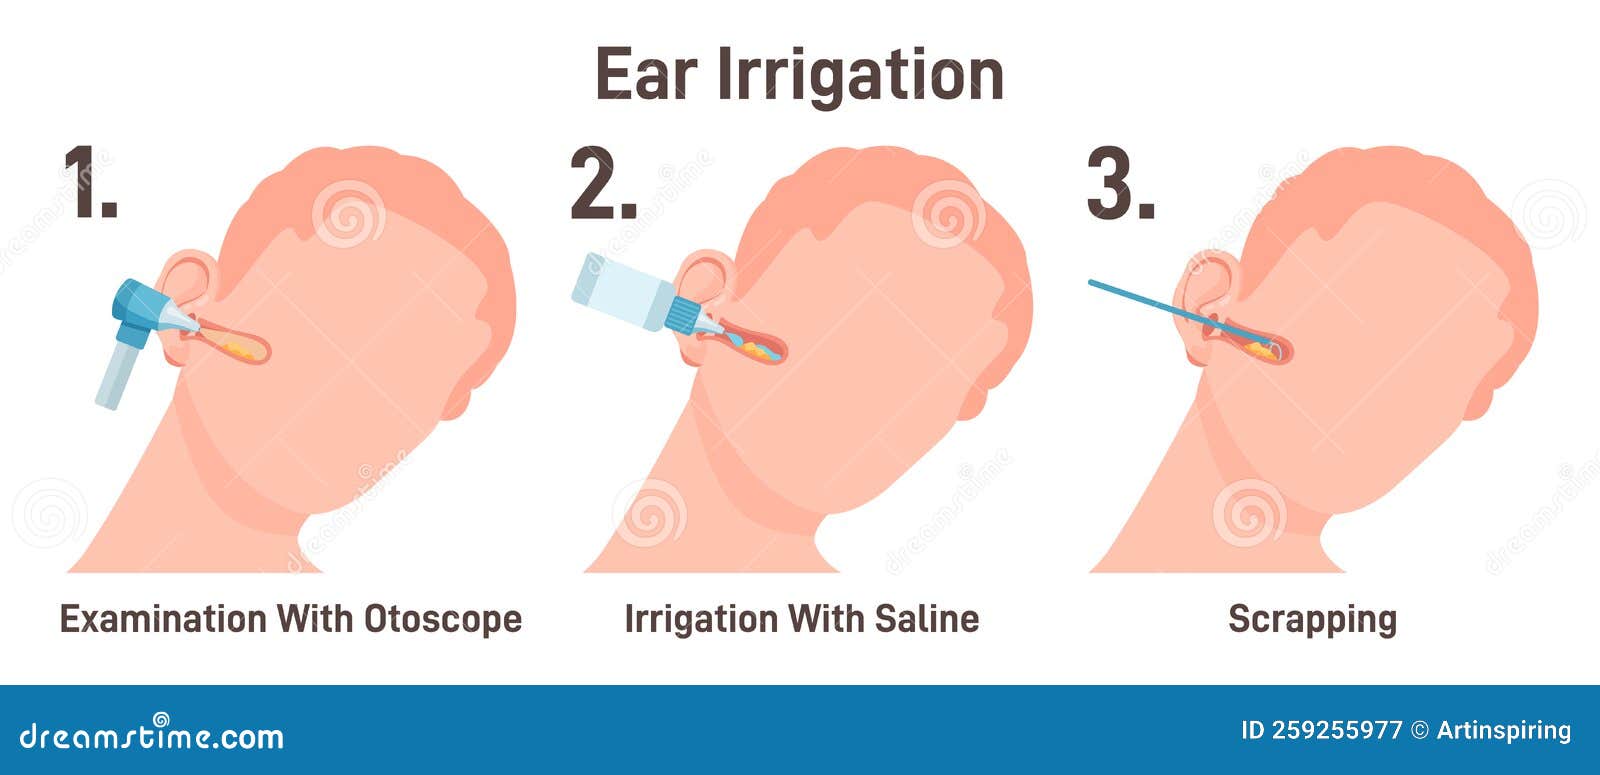 ent doctor irrigate ears. doctor checking ear canals, removing